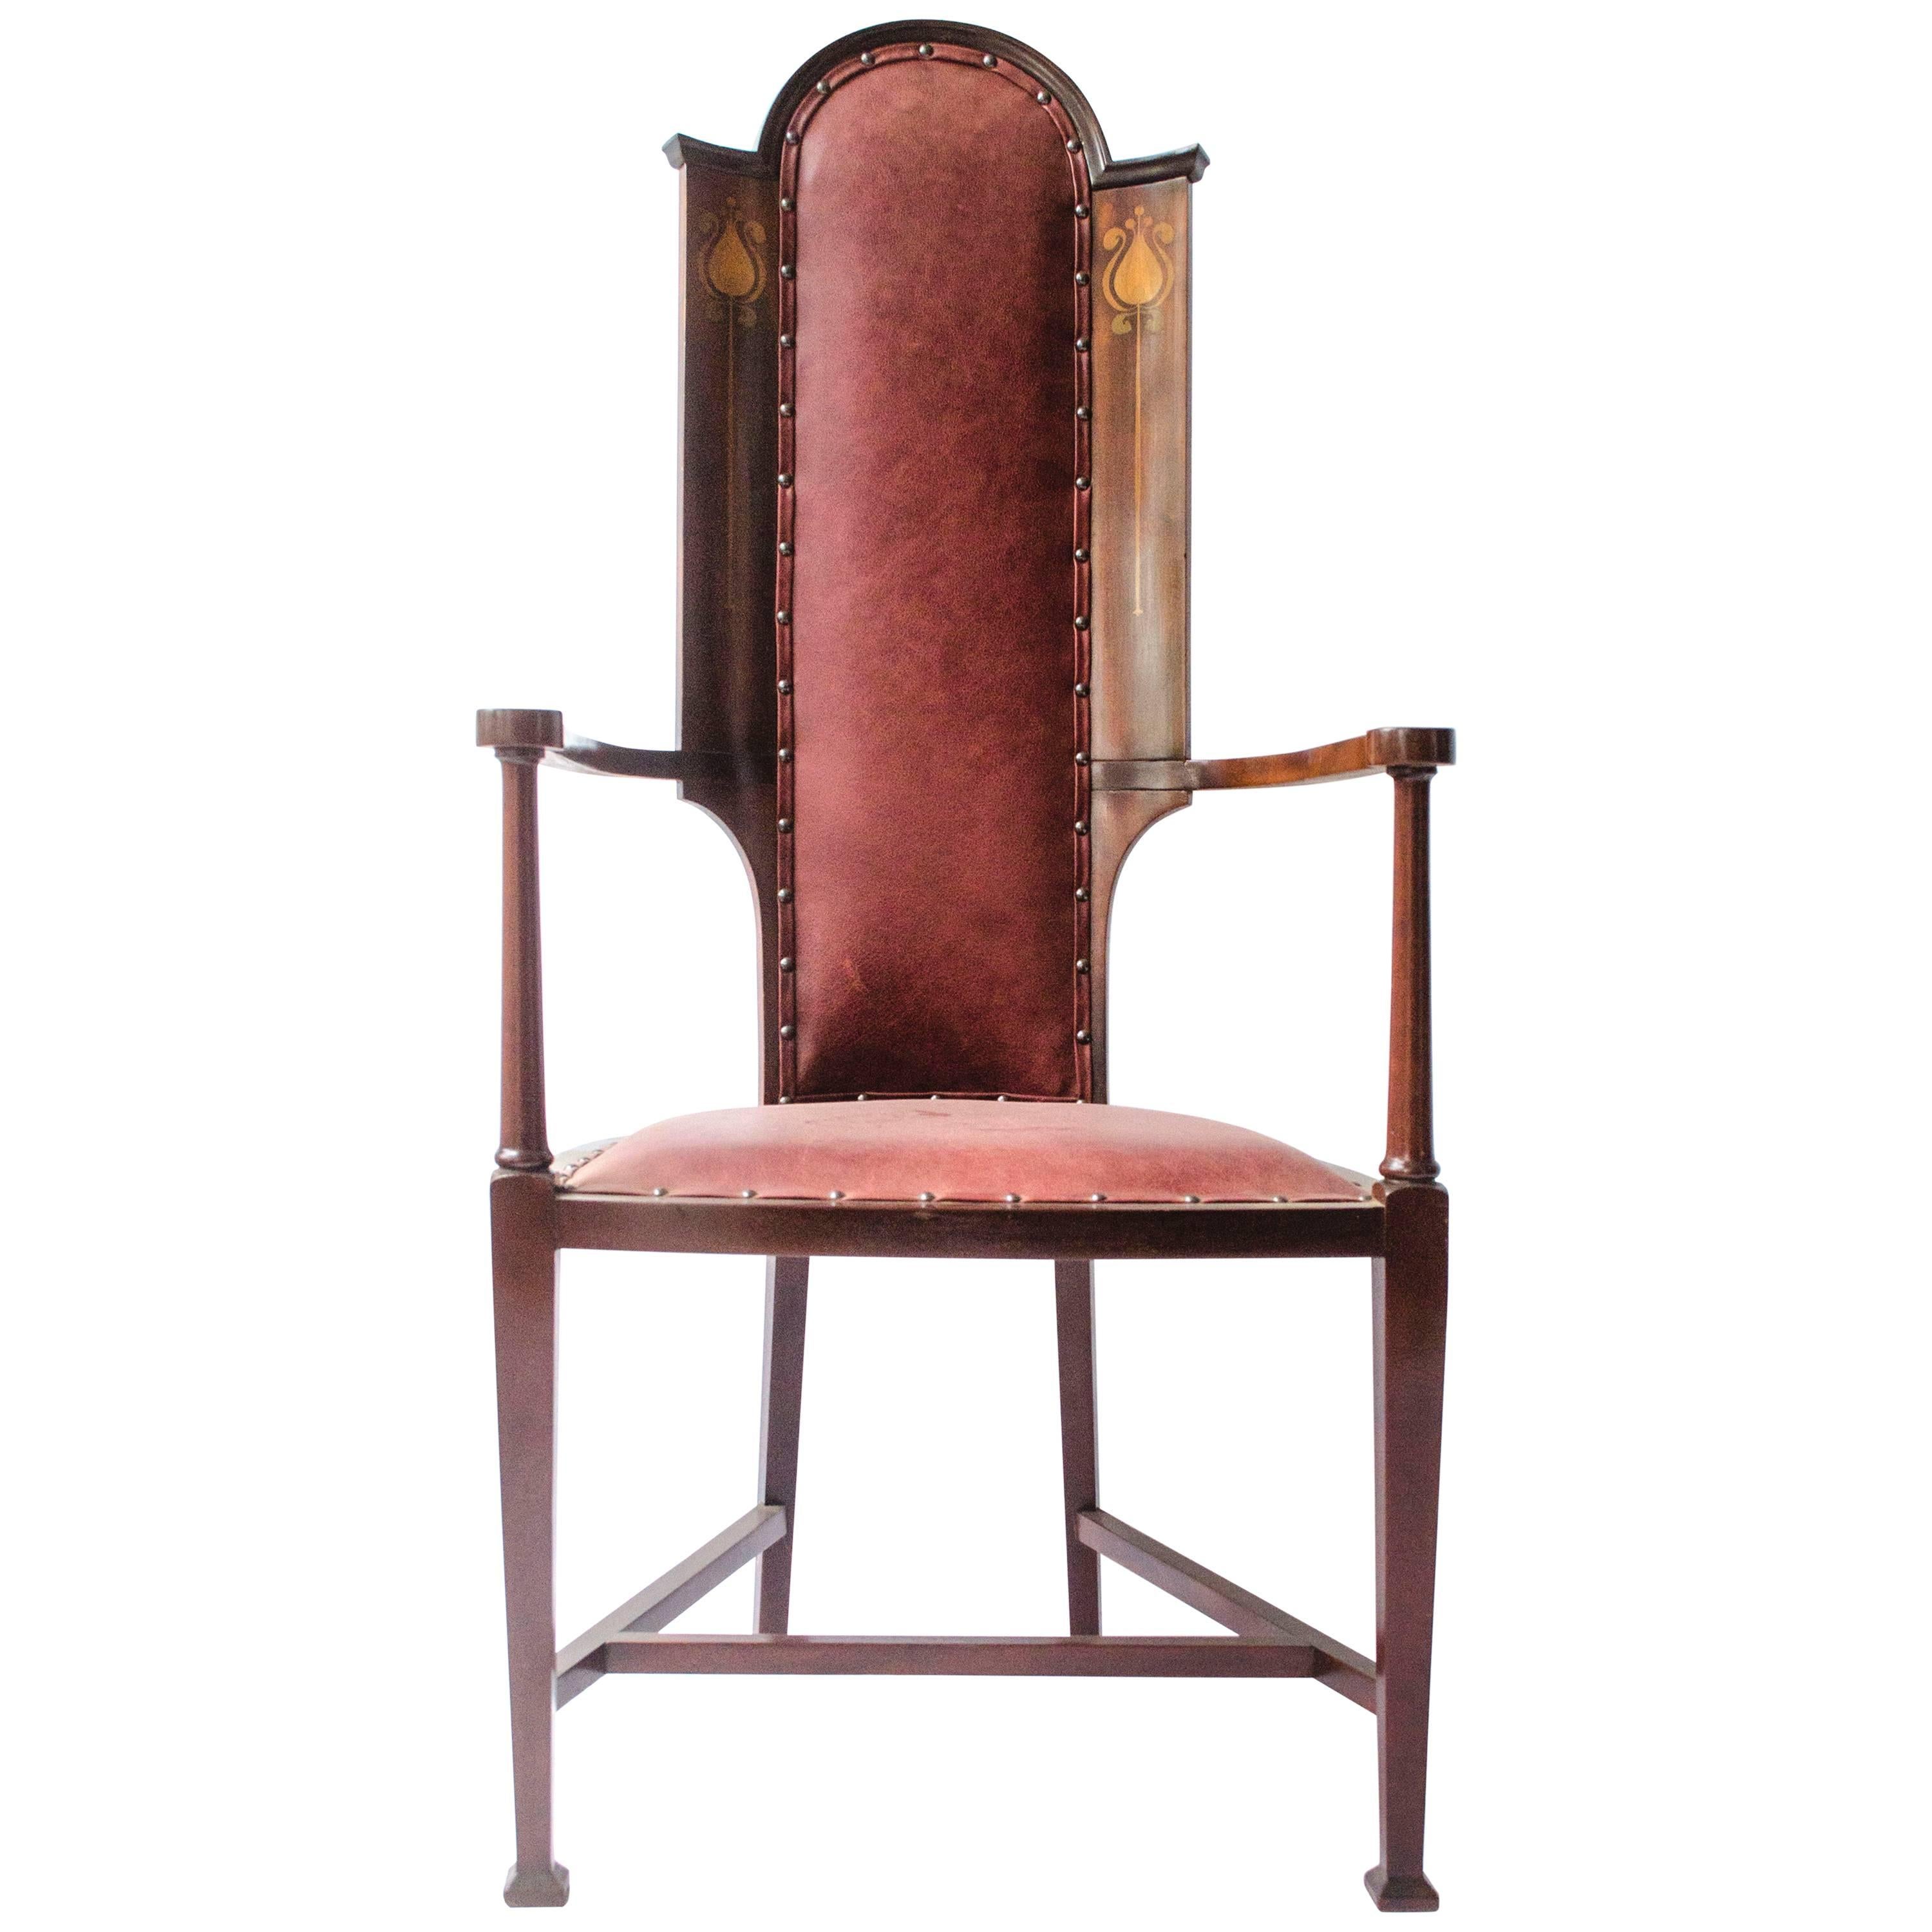 J S Henry attr. An Arts & Crafts Mahogany Armchair With Stylised Floral Inlays